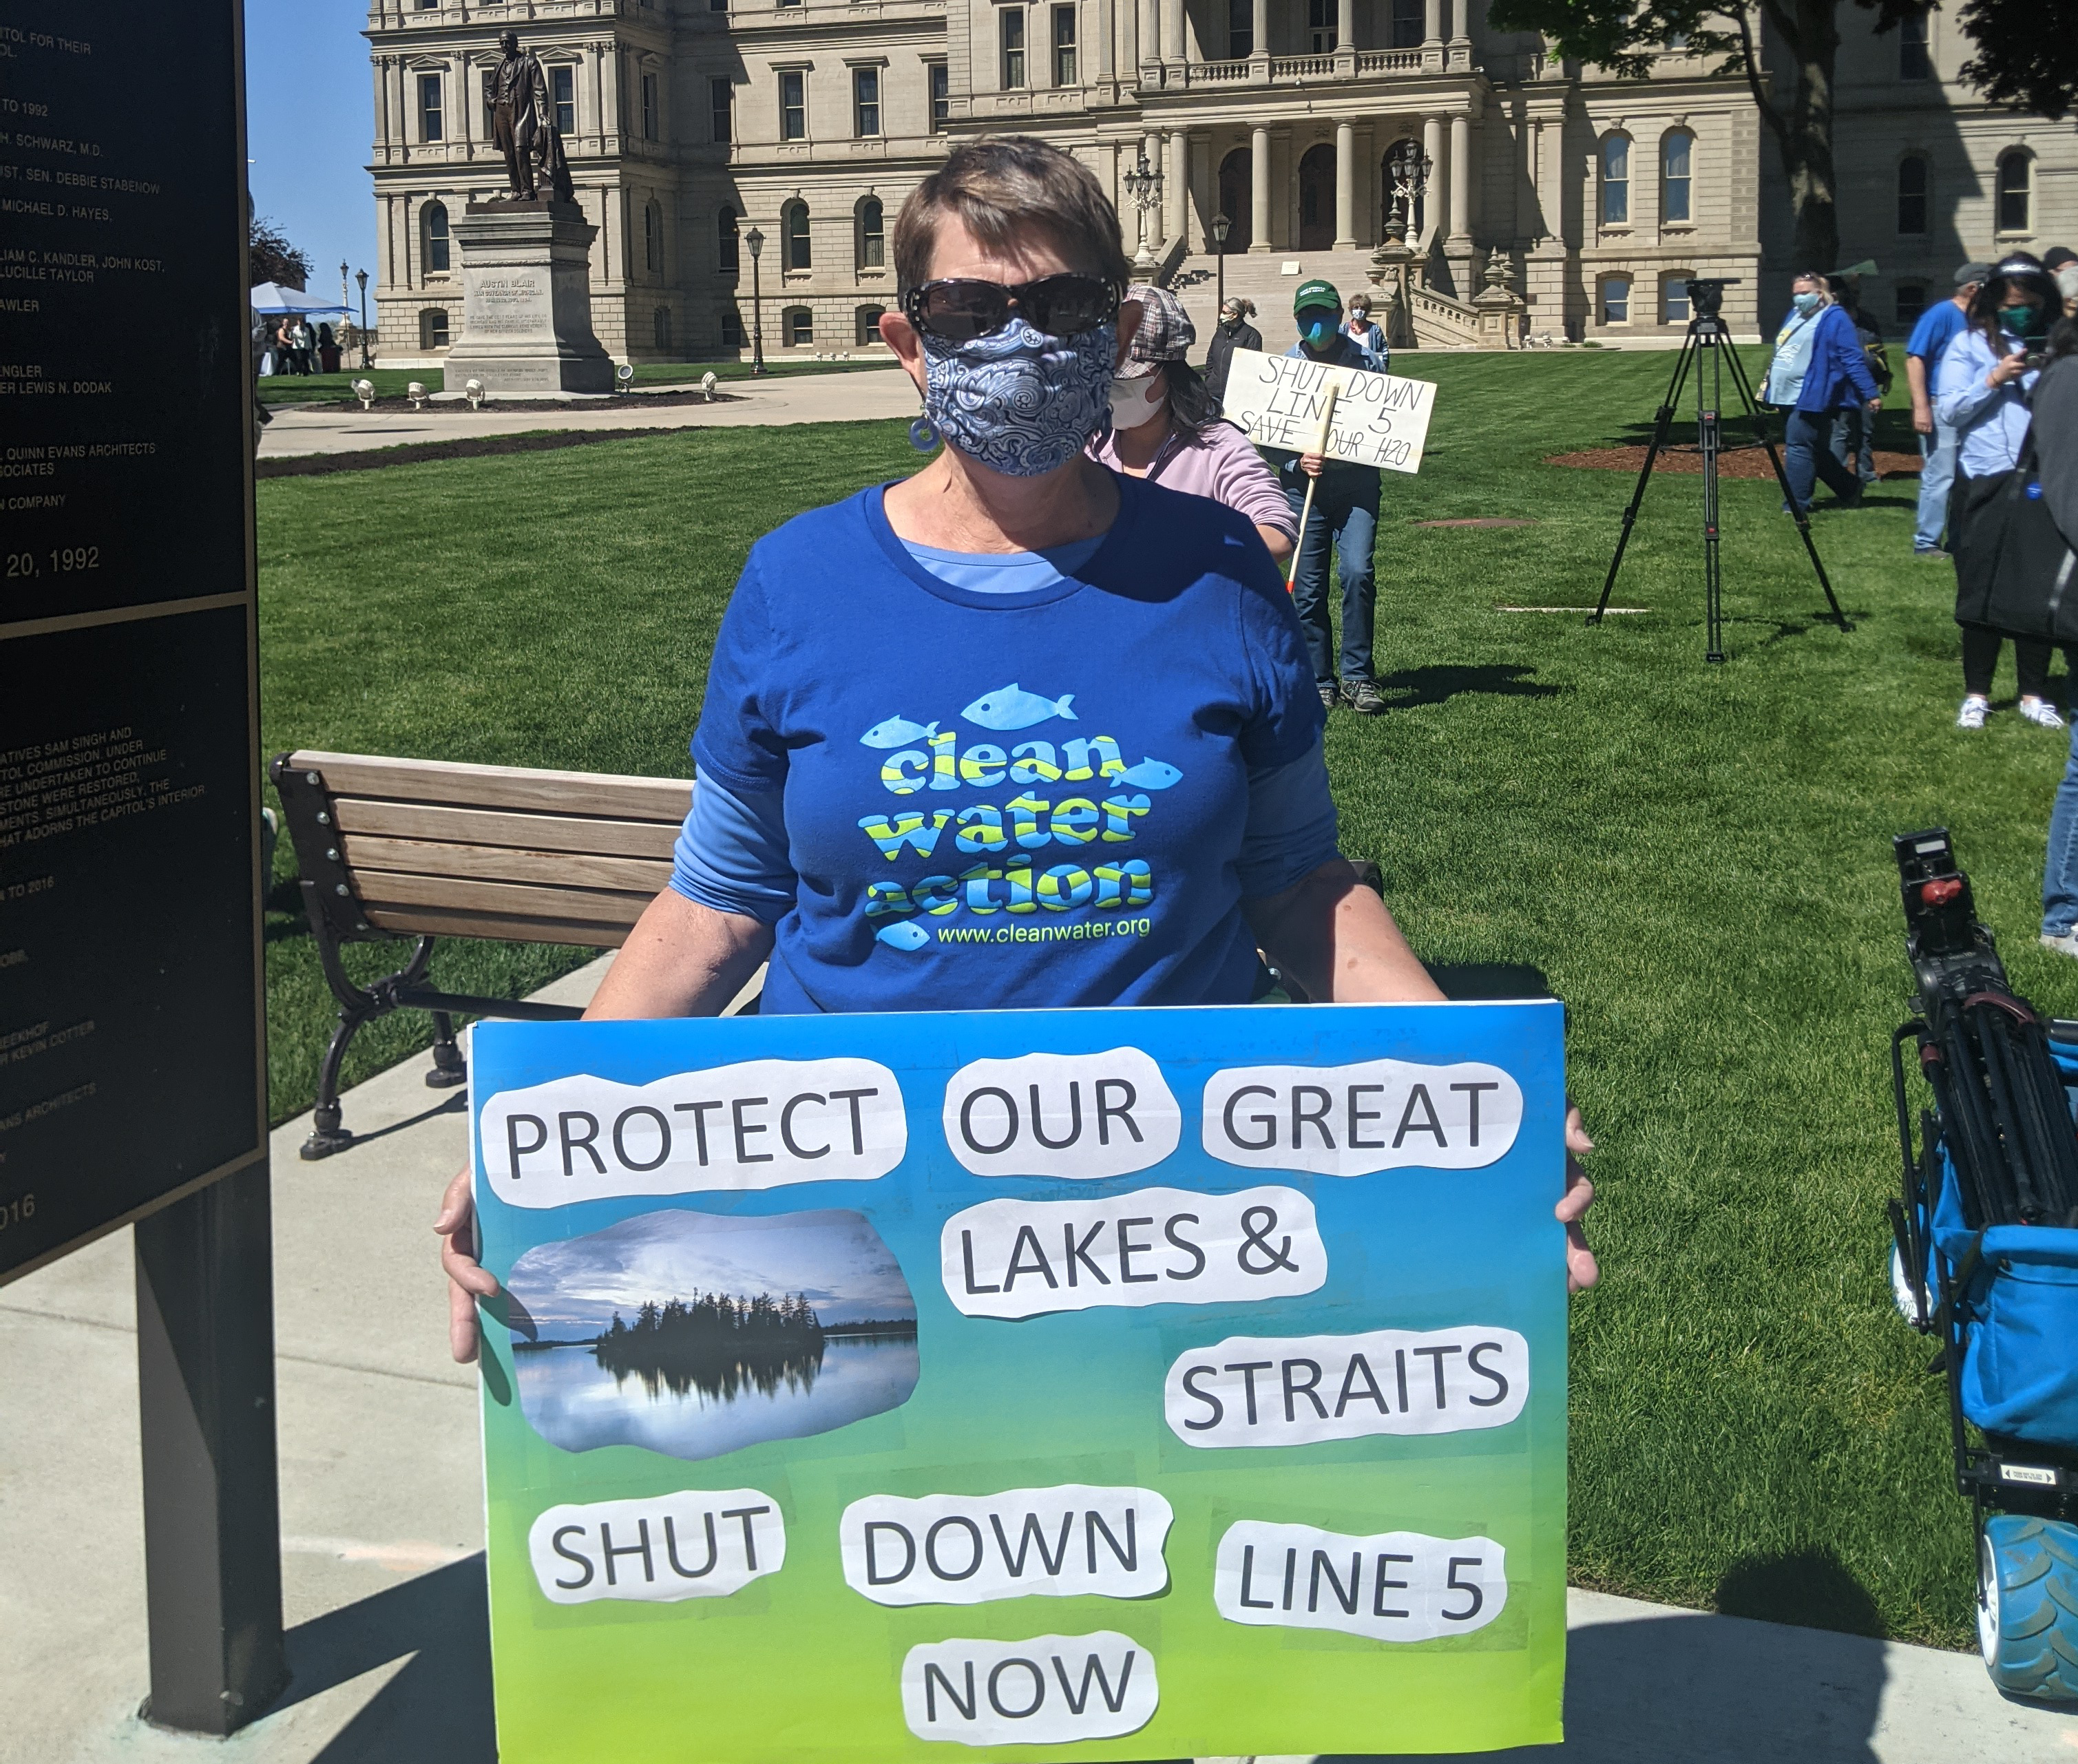 Protestor outside Michigan Capitol wearing Clean Water Action shirt and sign saying Protect our Great Lakes and Straits Shut Down Line 5 Now